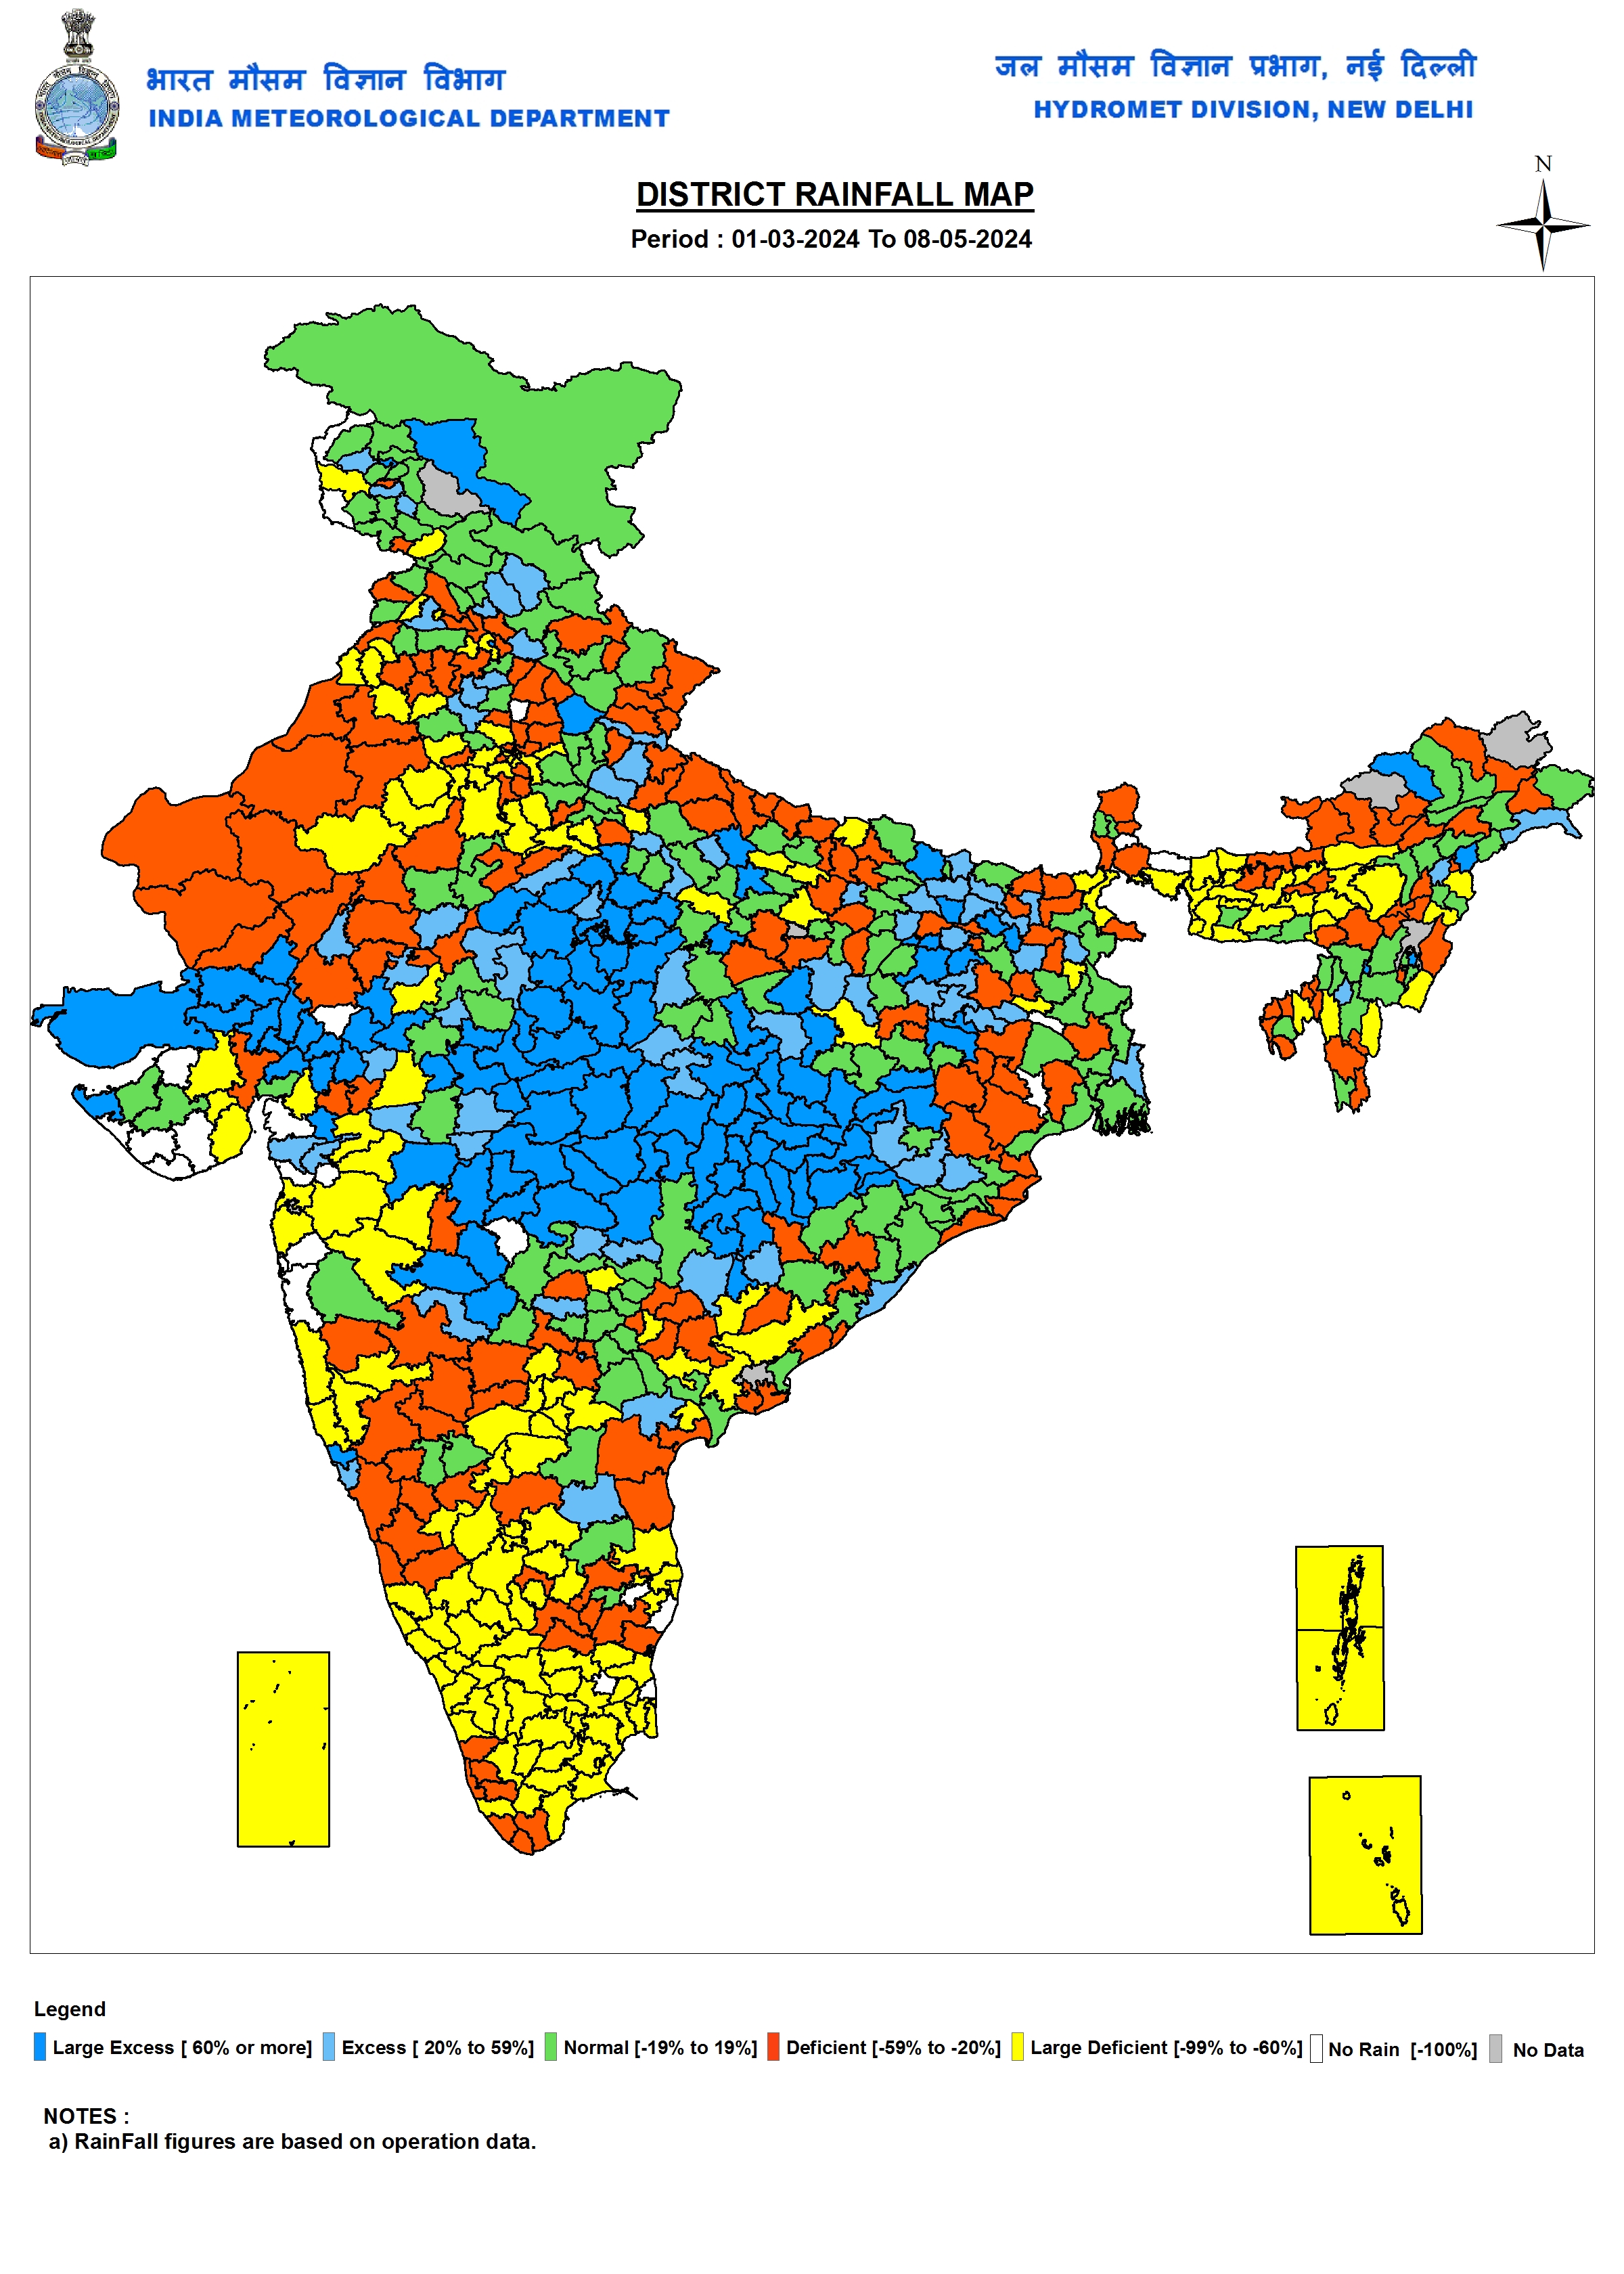 DISTRICT_RAINFALL_MAP_COUNTRY_INDIA_c.JP